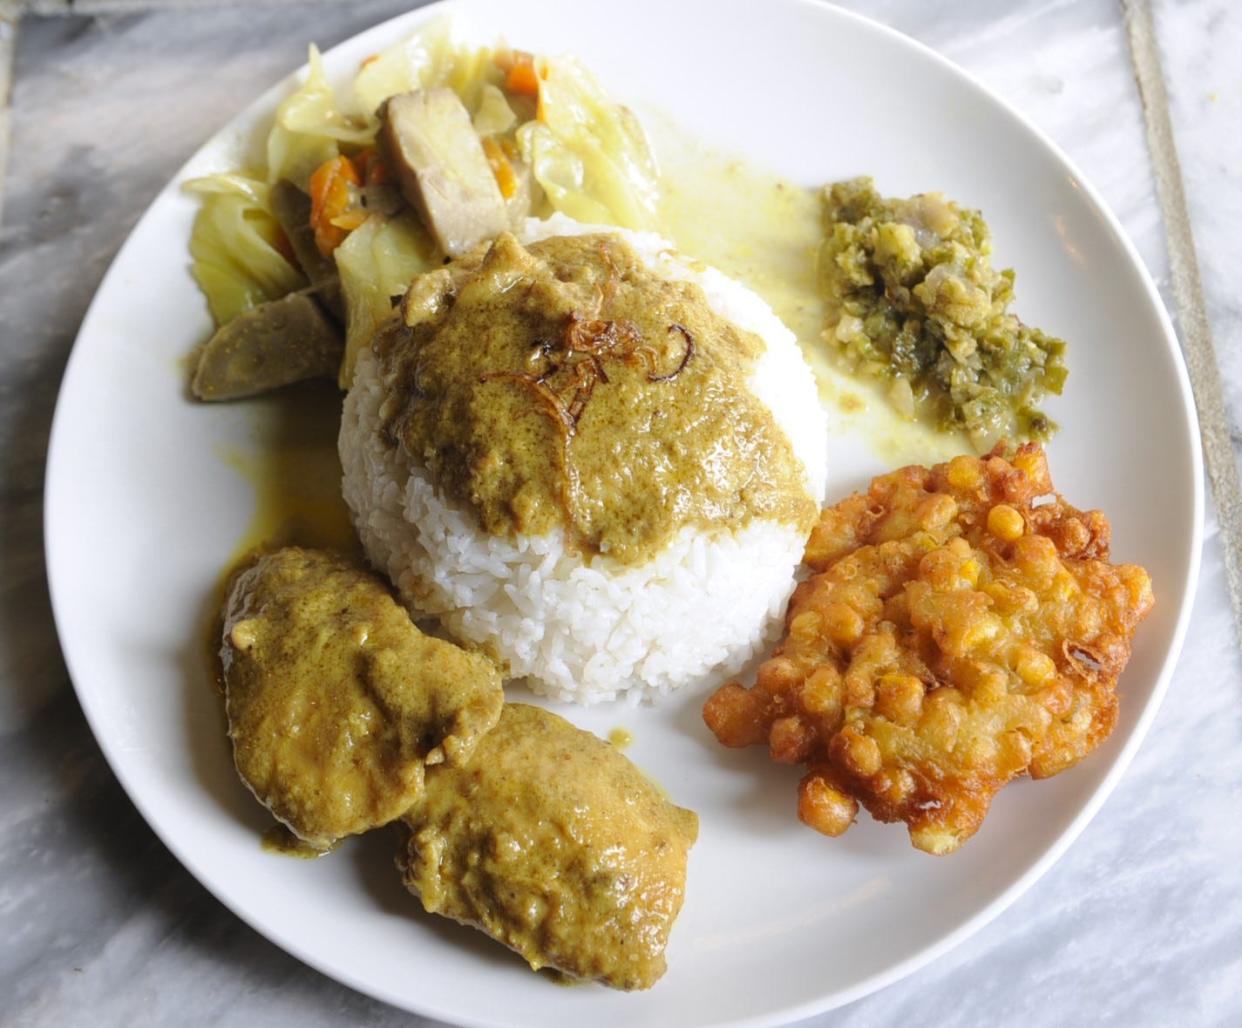 The entree plate at the March 11 Osaka Indonesian night will contain rice with chicken curry, a sweet corn fritter, savory jackfruit and vegetable stir fry and hot green chili sambal. Ginger tea, appetizers, a soup and desserts will also be on the menu.